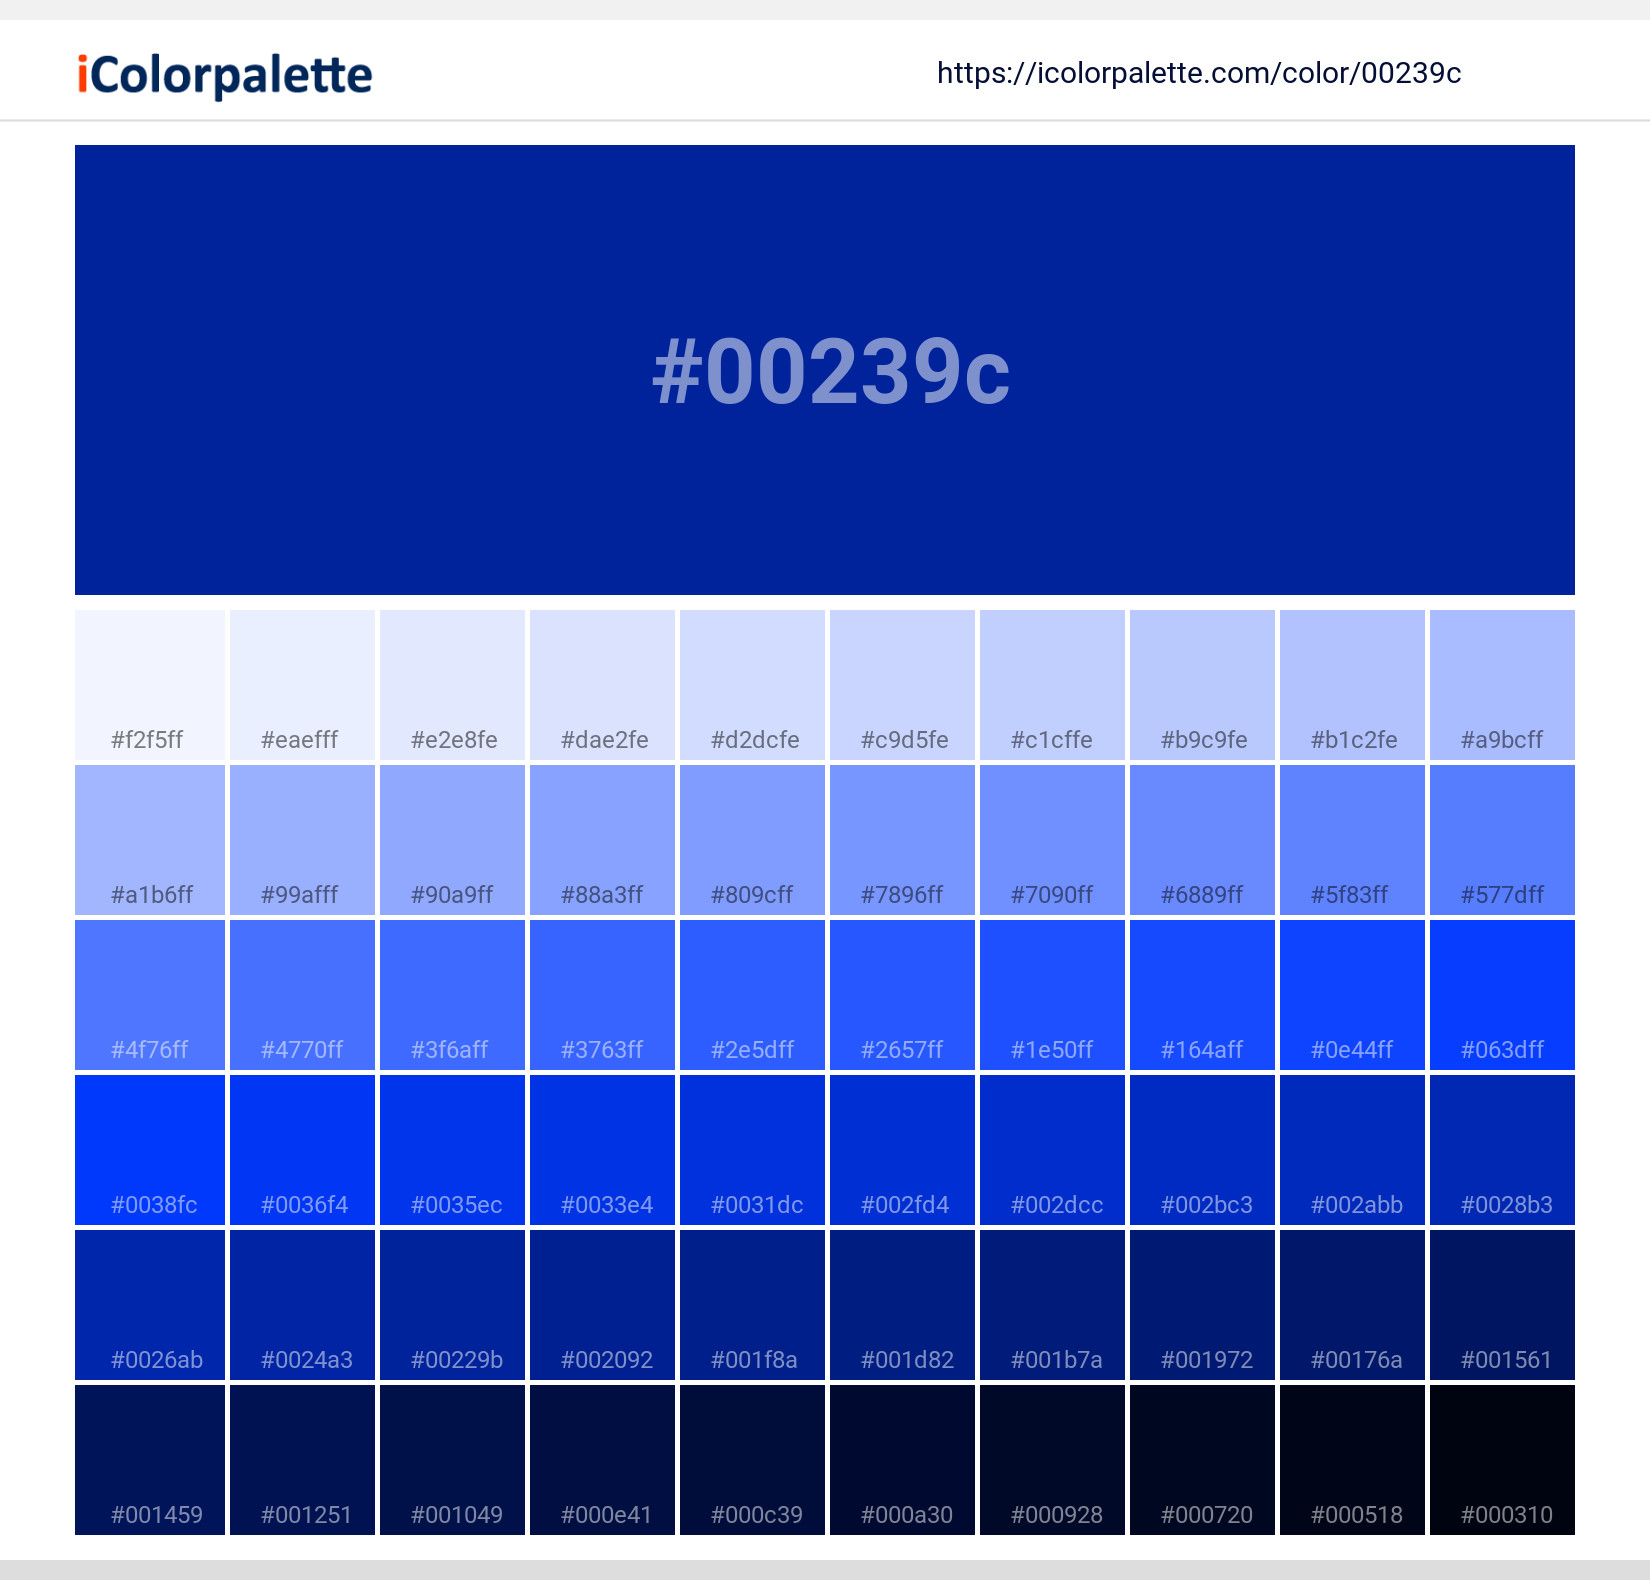 https://www.icolorpalette.com/download/shades/00239c_color_shades.jpg